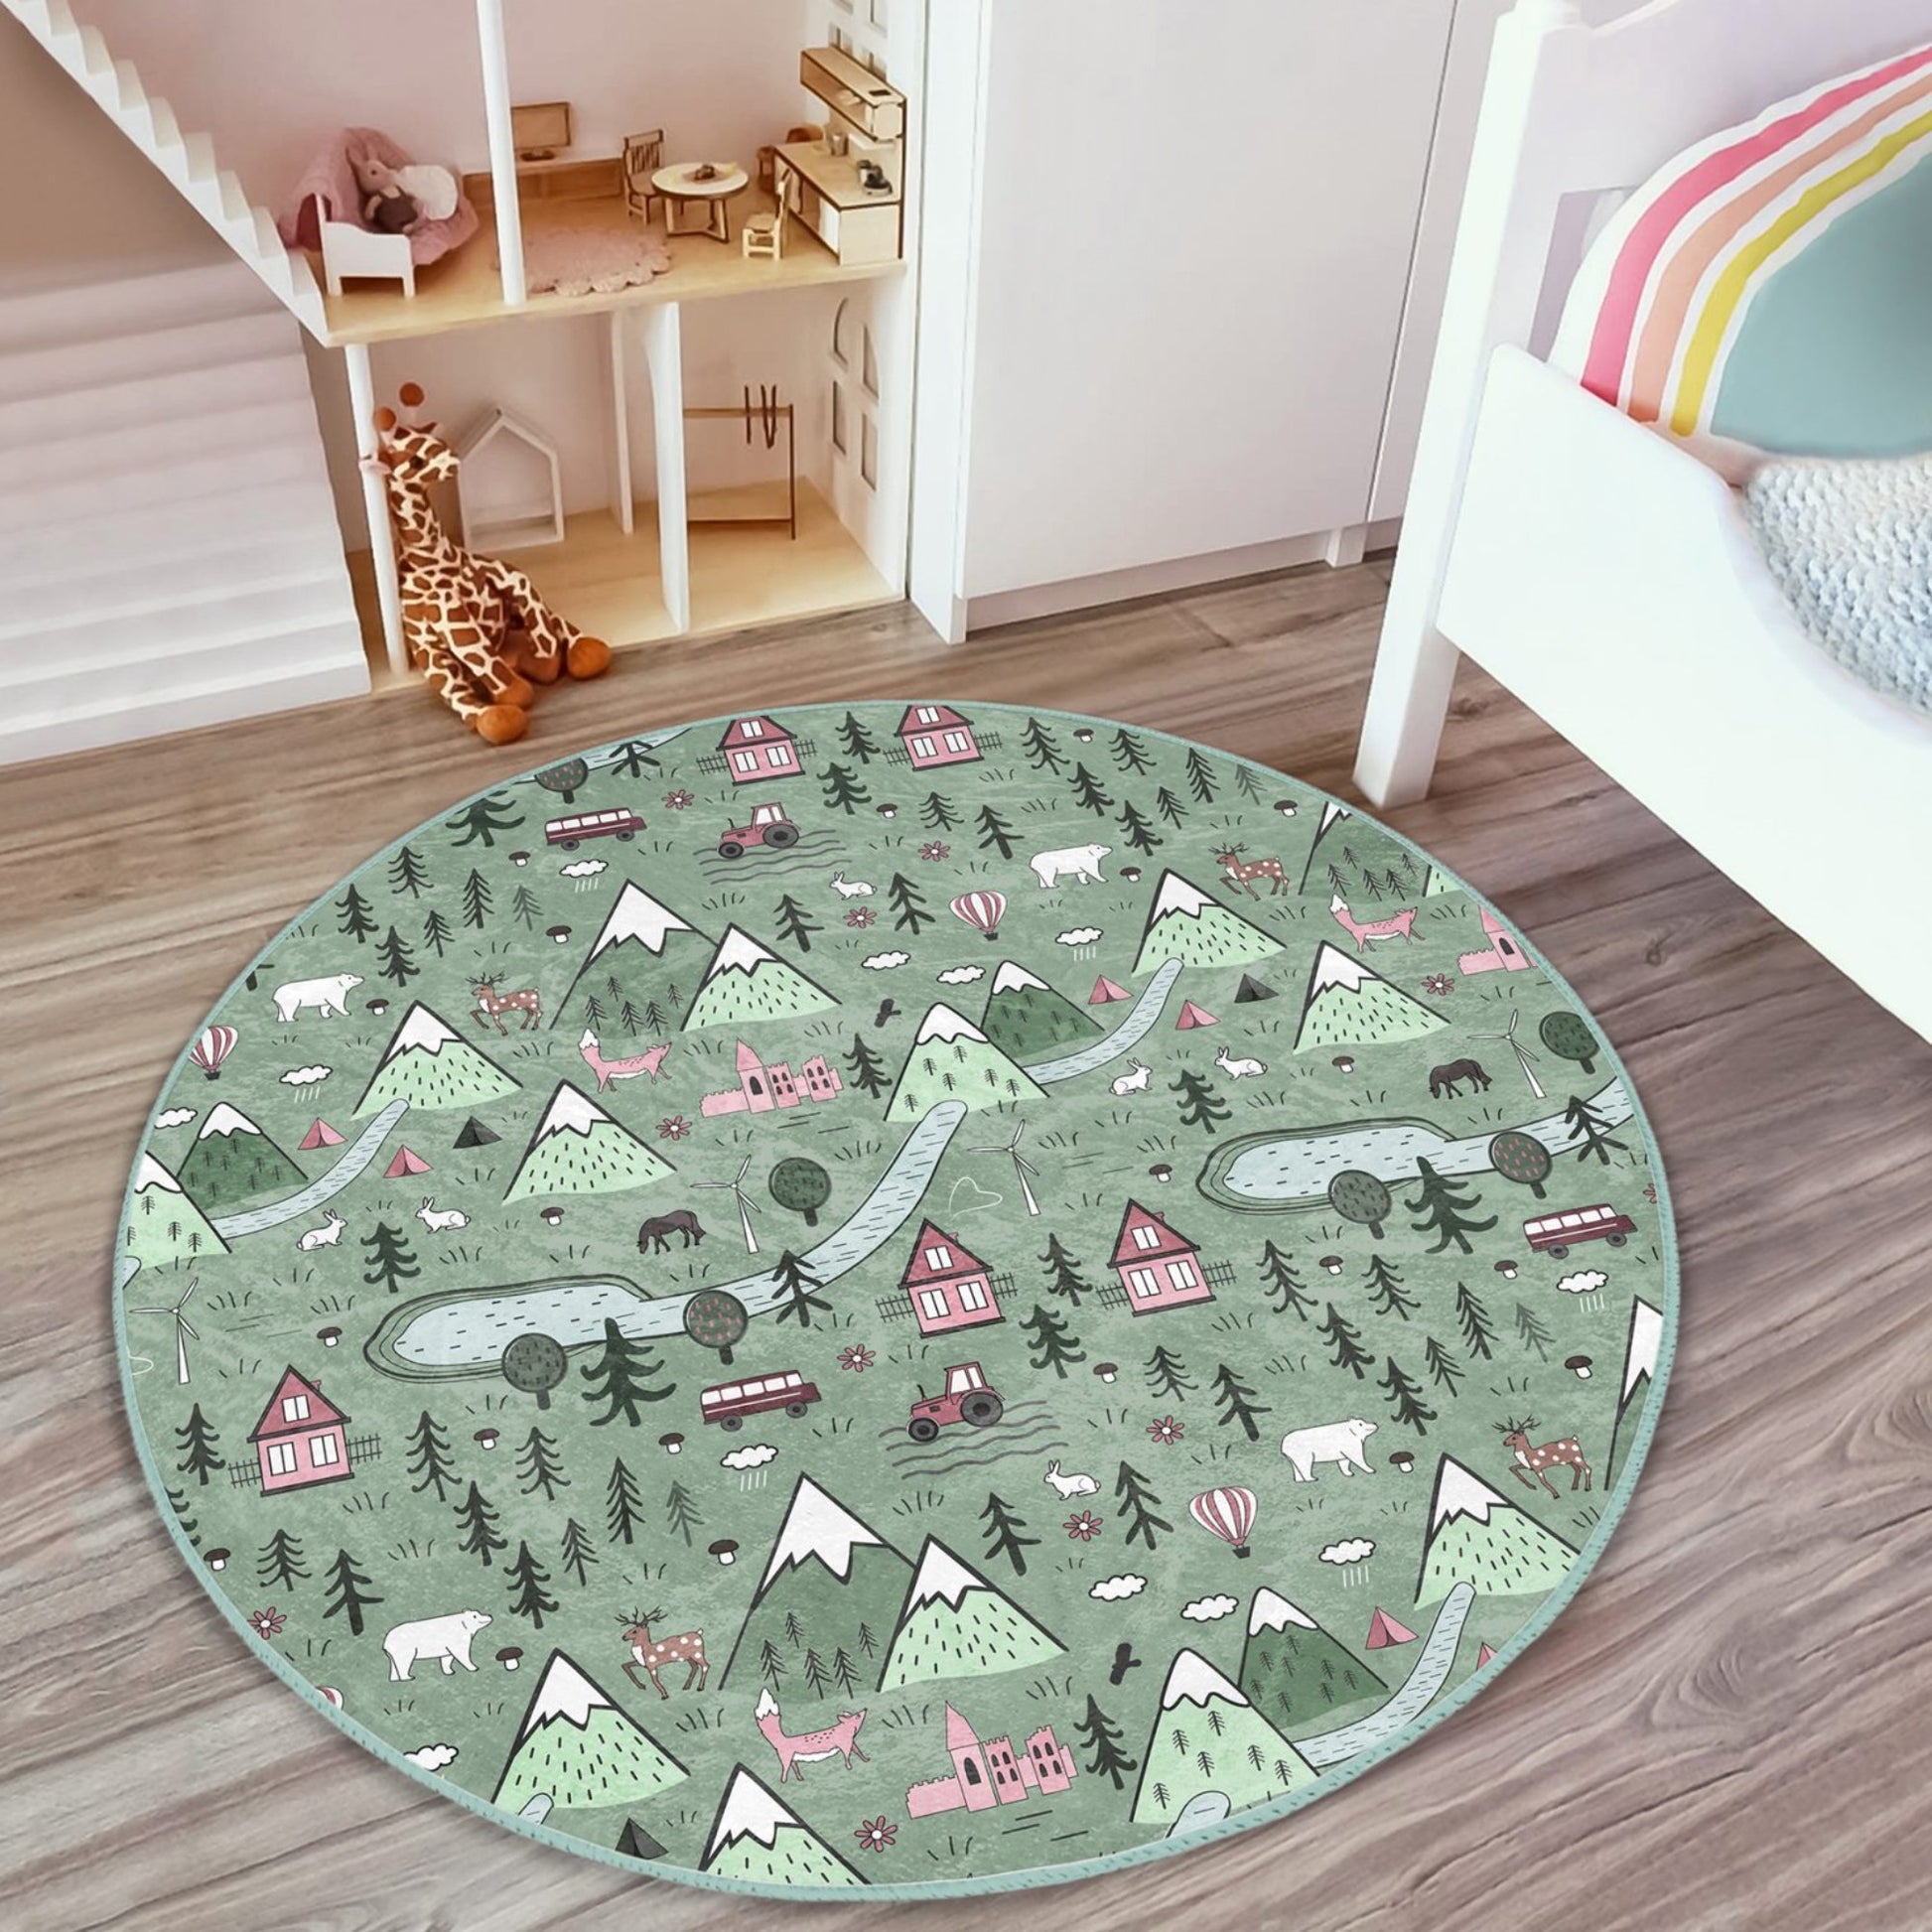 Tranquil Mountain Village Scene on a Washable Rug